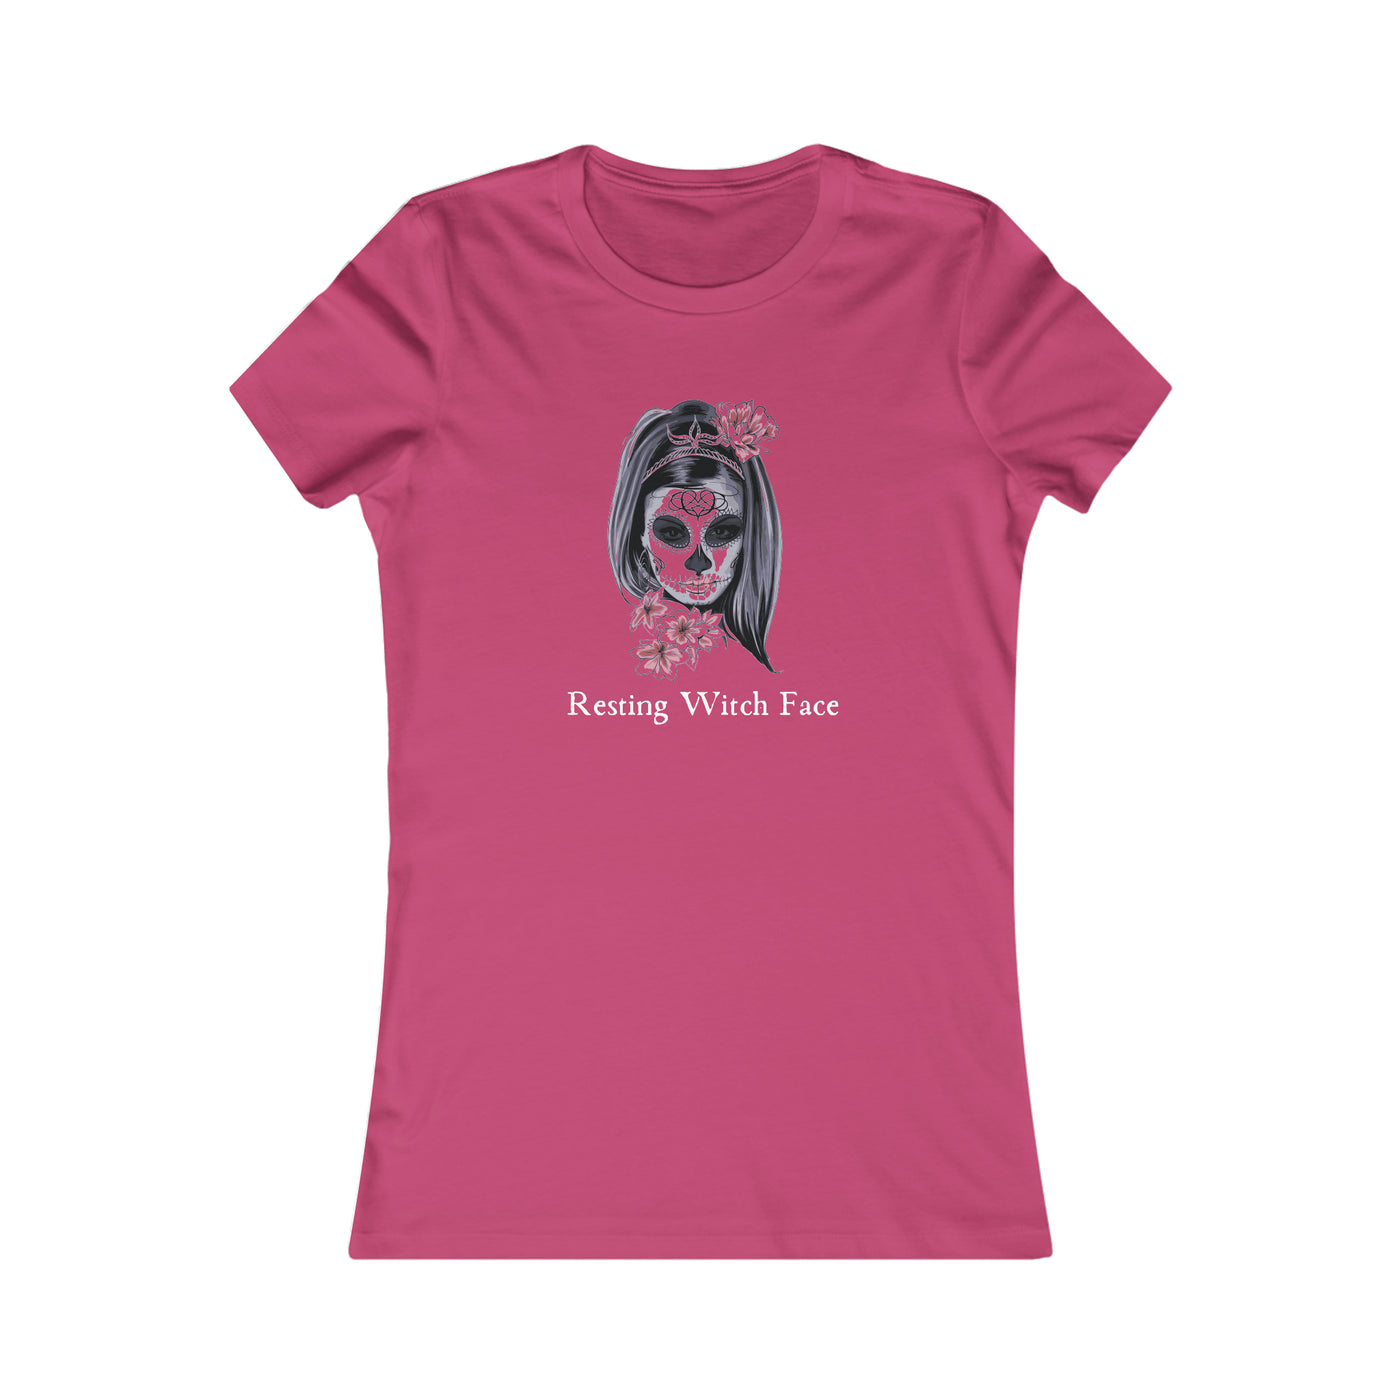 Resting Witch Face Women's Favorite Tee